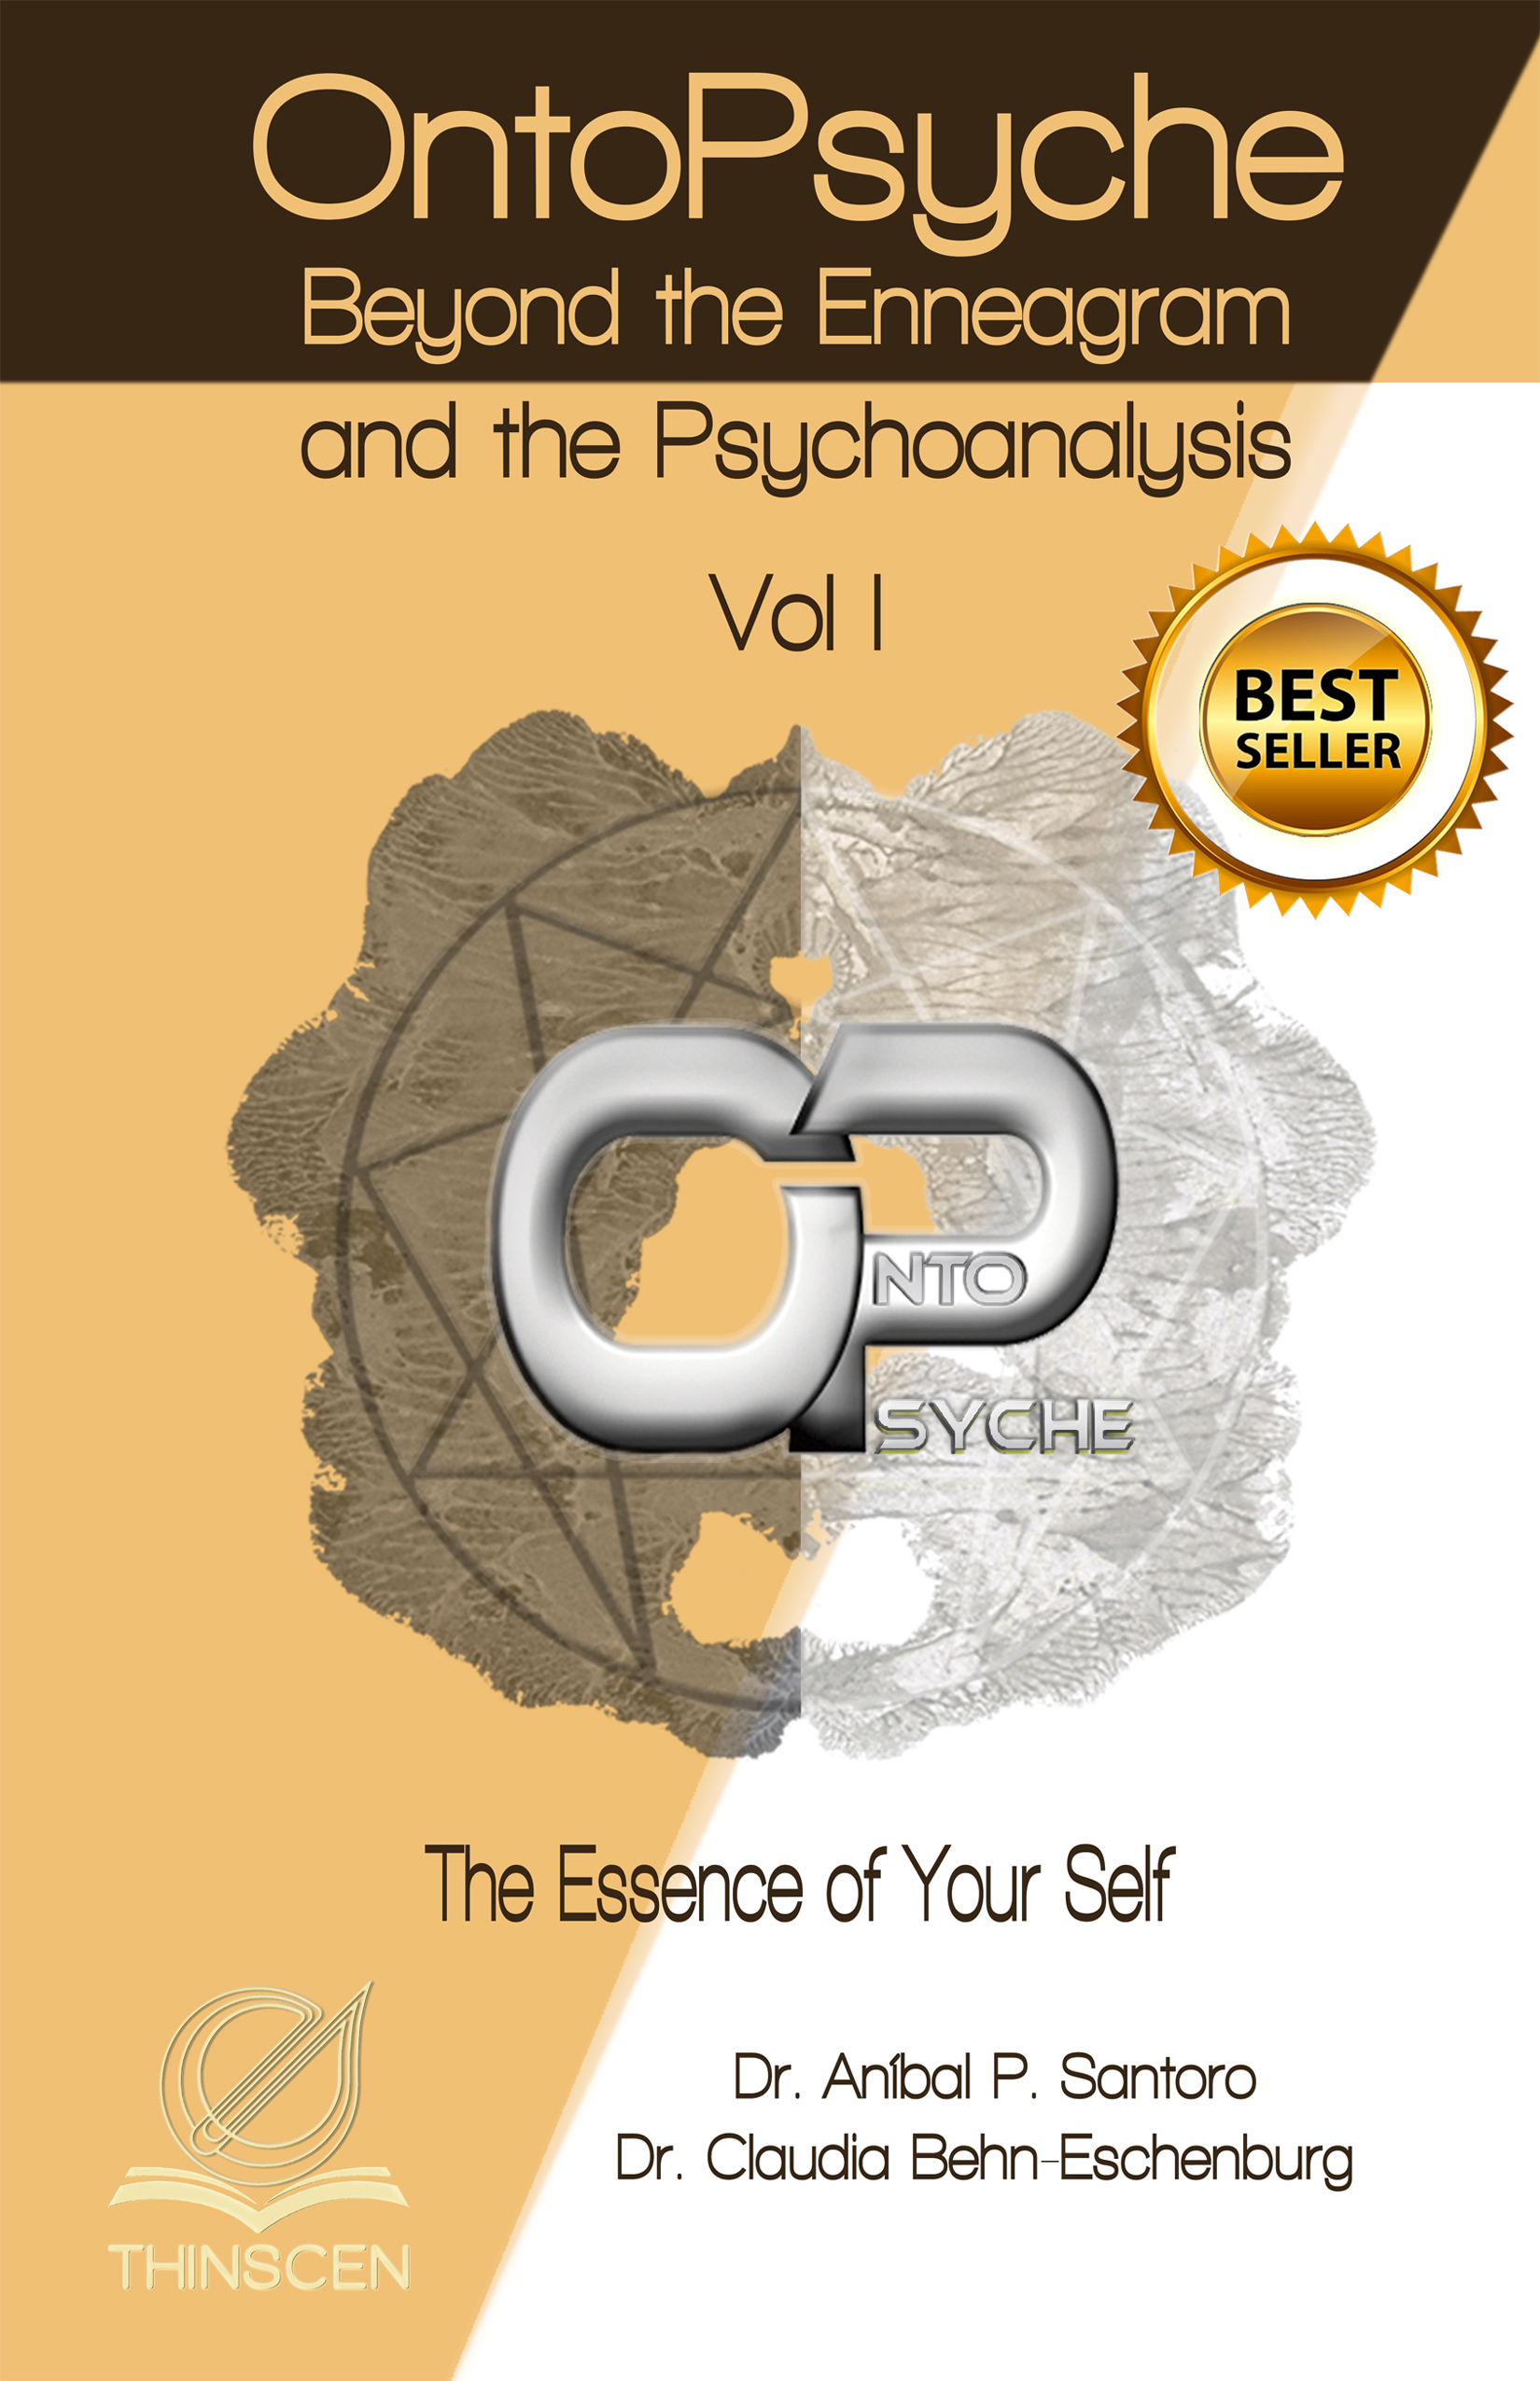 OntoPsyche - Beyond the Enneagram and the Psychoanalysis: Vol I - Your Dynamic Strengths cover